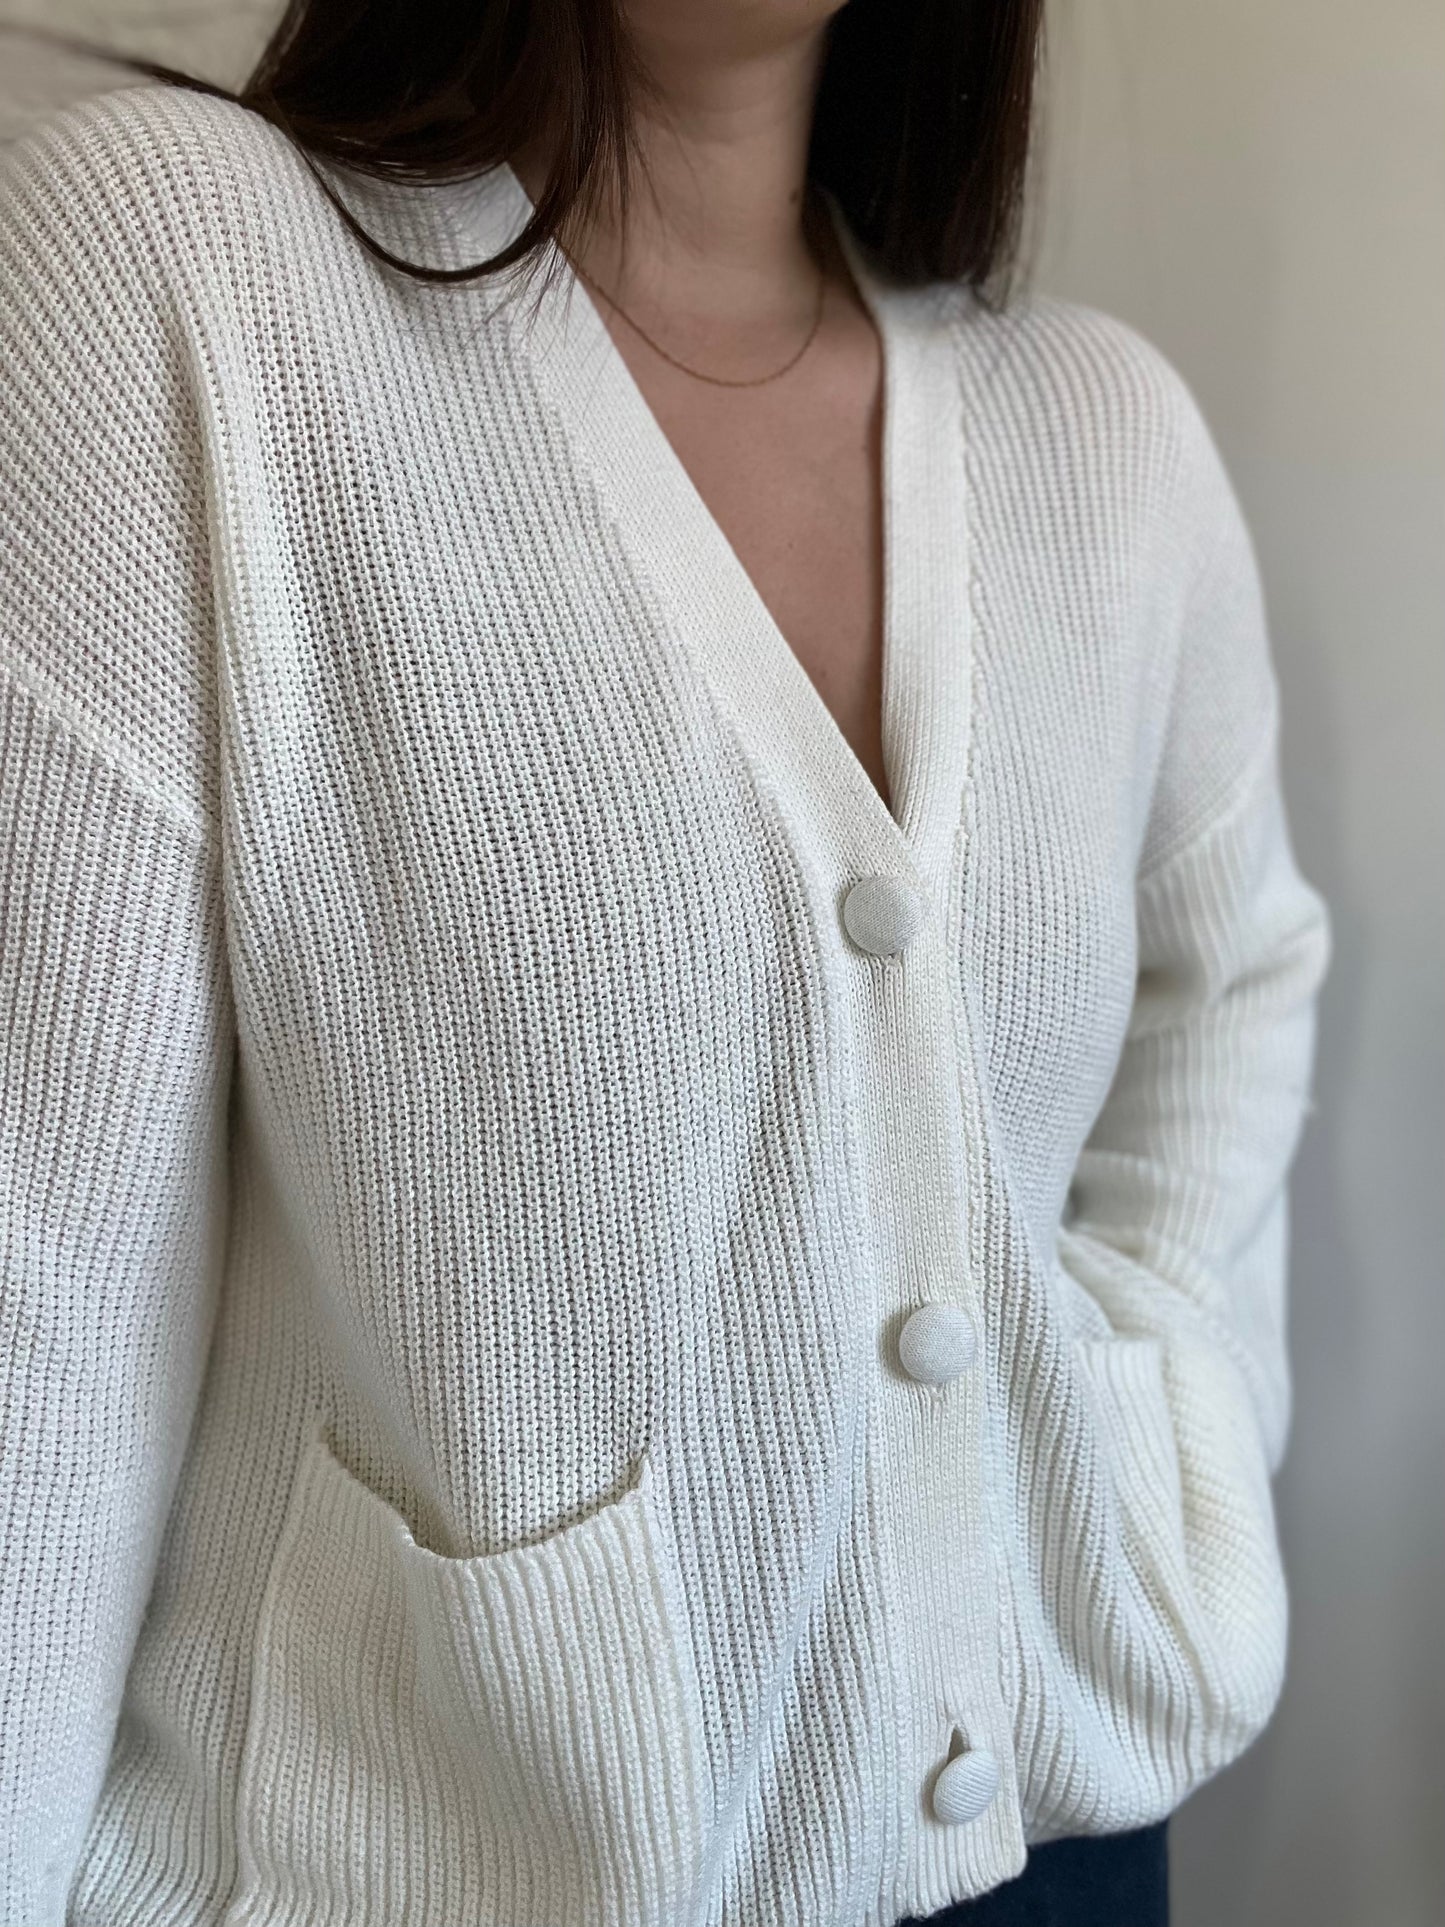 Relaxed White Knit Cardigan - XL